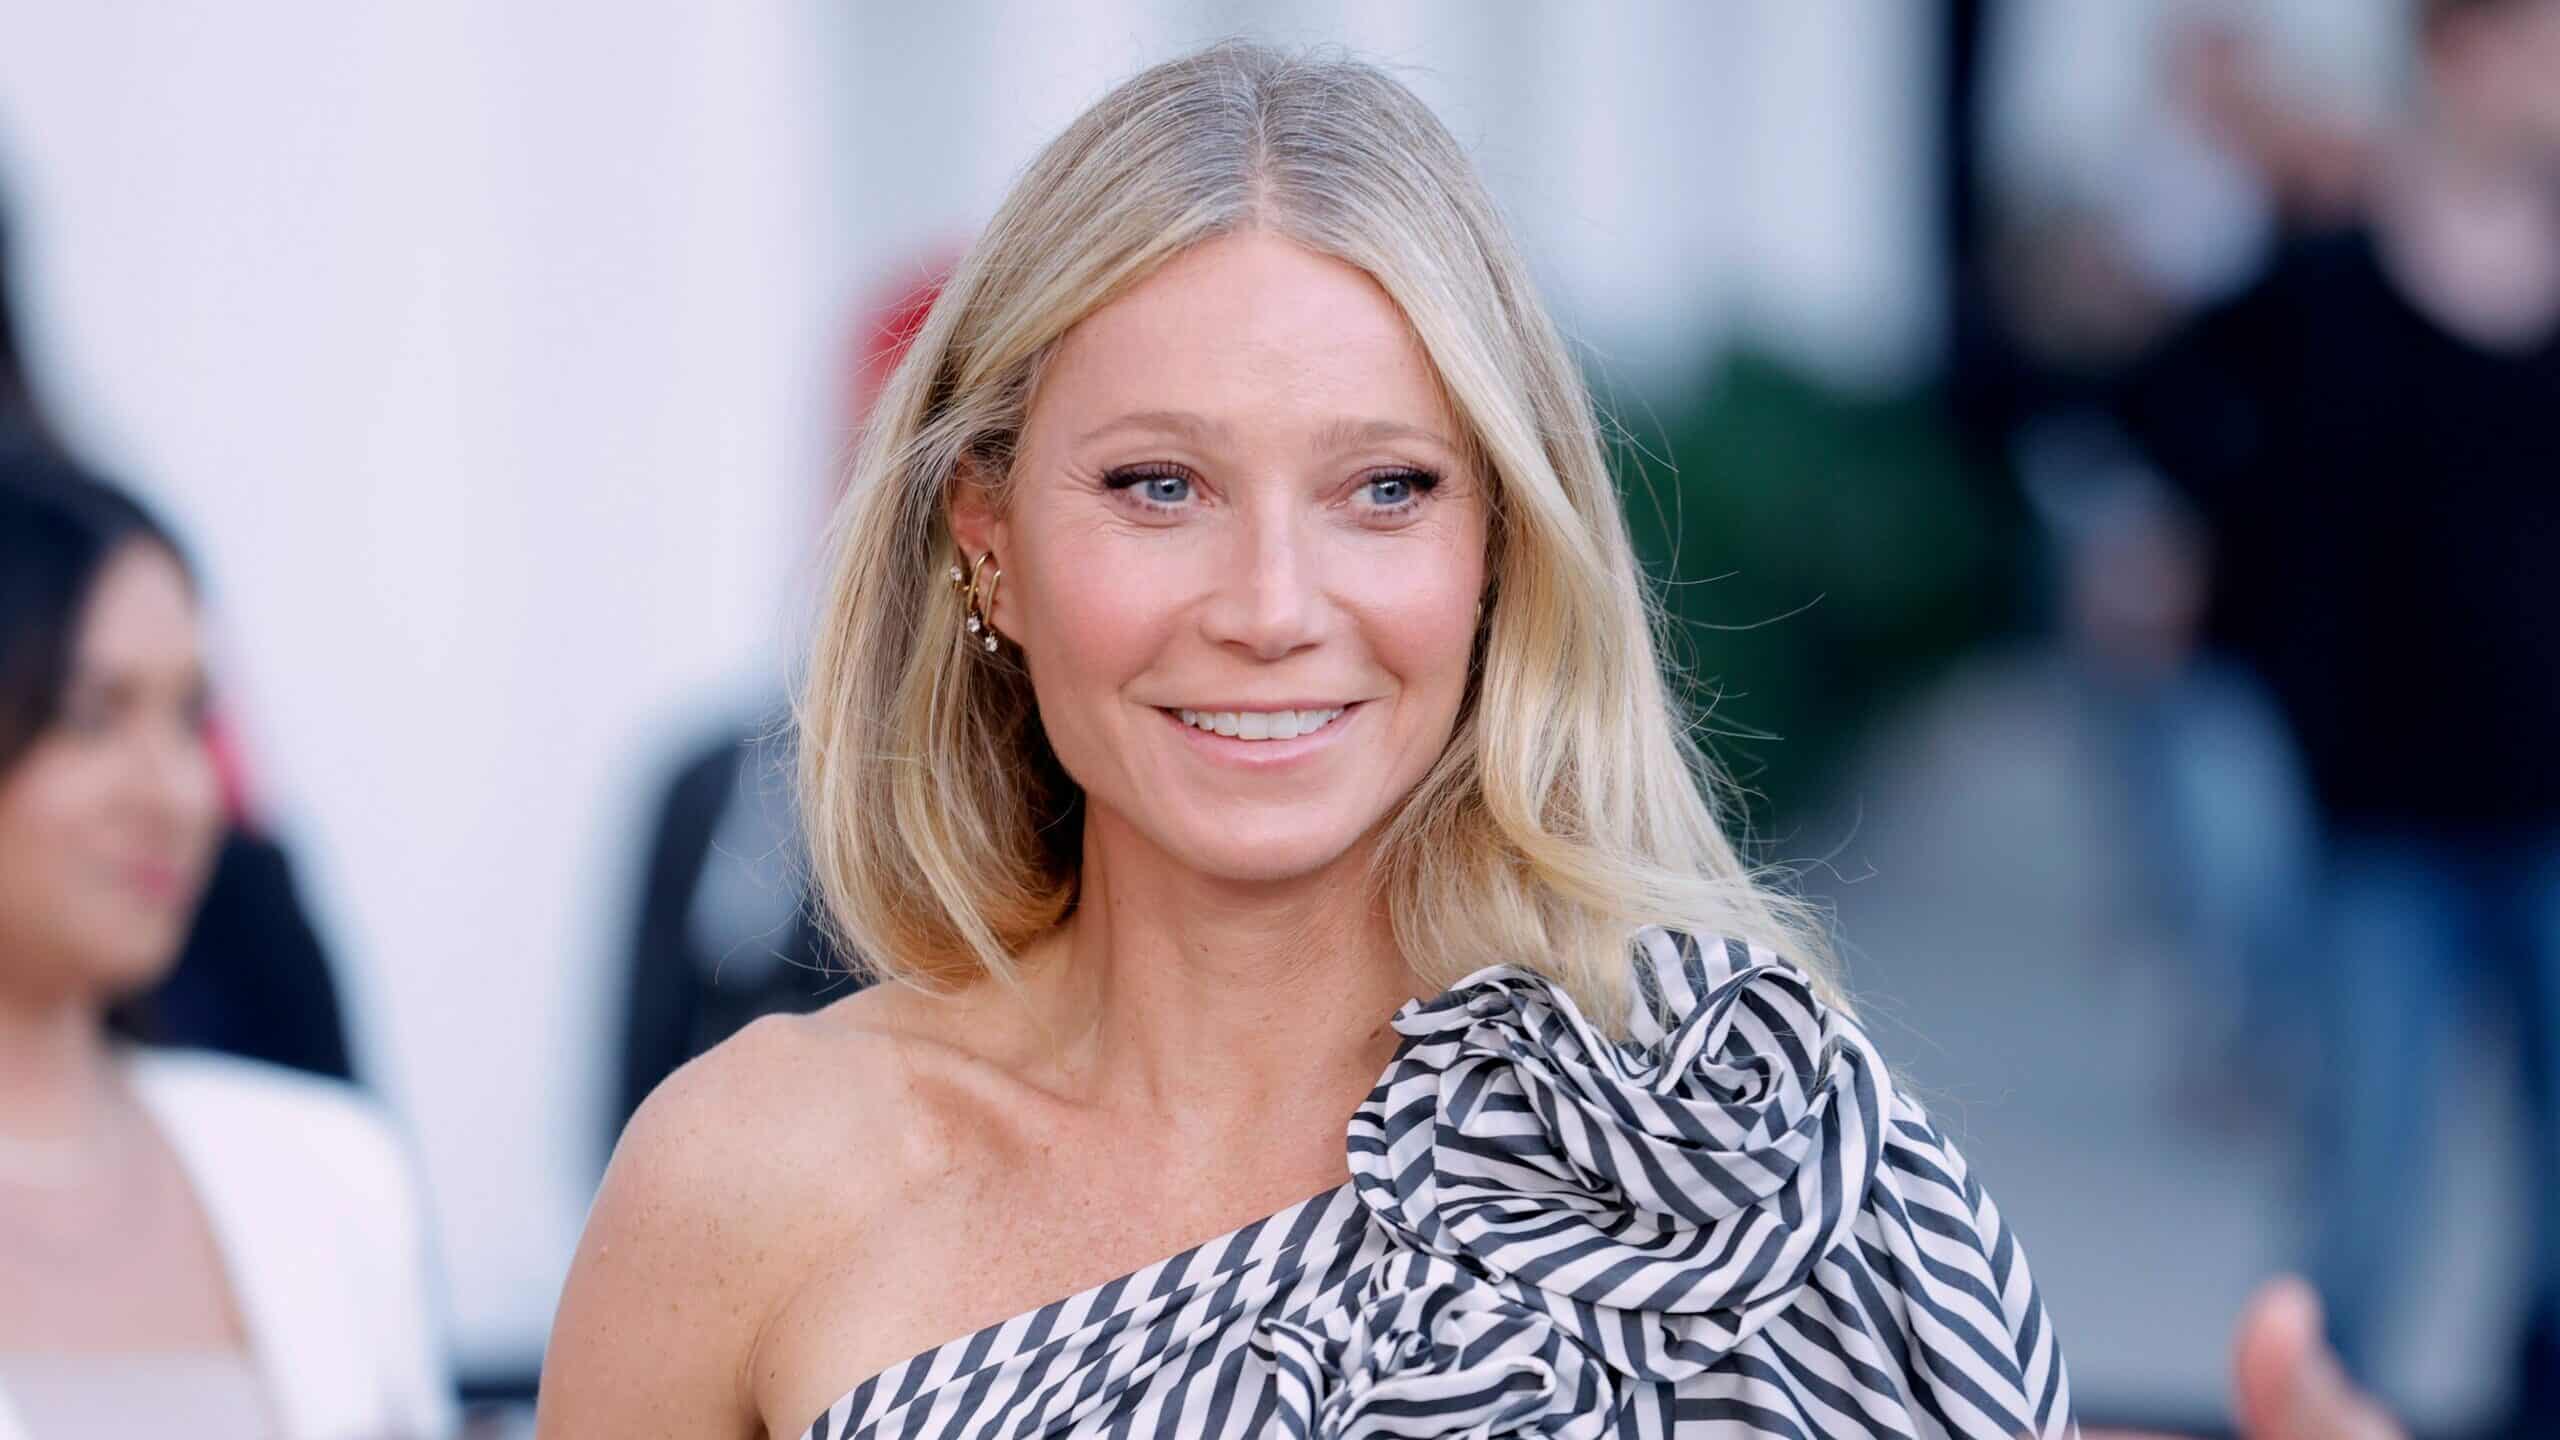 Gwyneth Paltrow attends Veuve Clicquot Celebrates 250th Anniversary with Solaire Exhibition on October 25, 2022 in Beverly Hills, California.